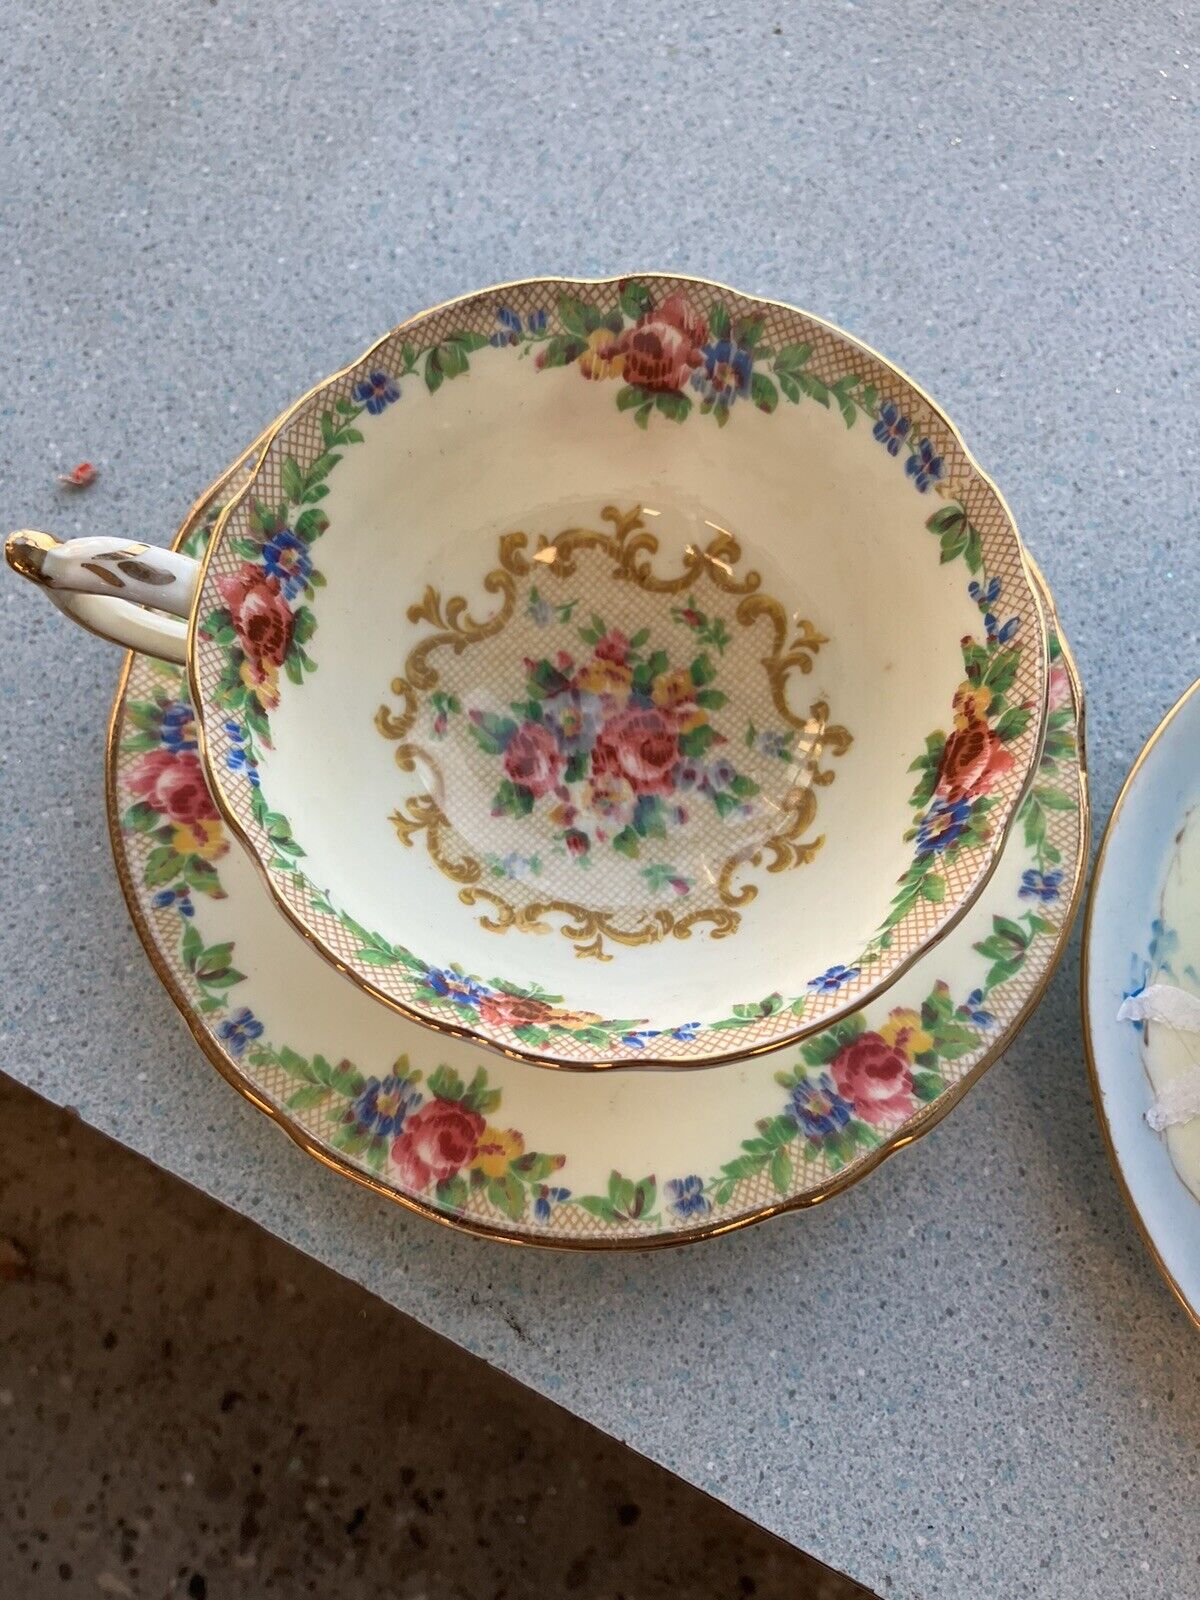 Paragon Minuet Bone China Footed Cup and Saucer Cream Gold Trim Pink Blue Floral